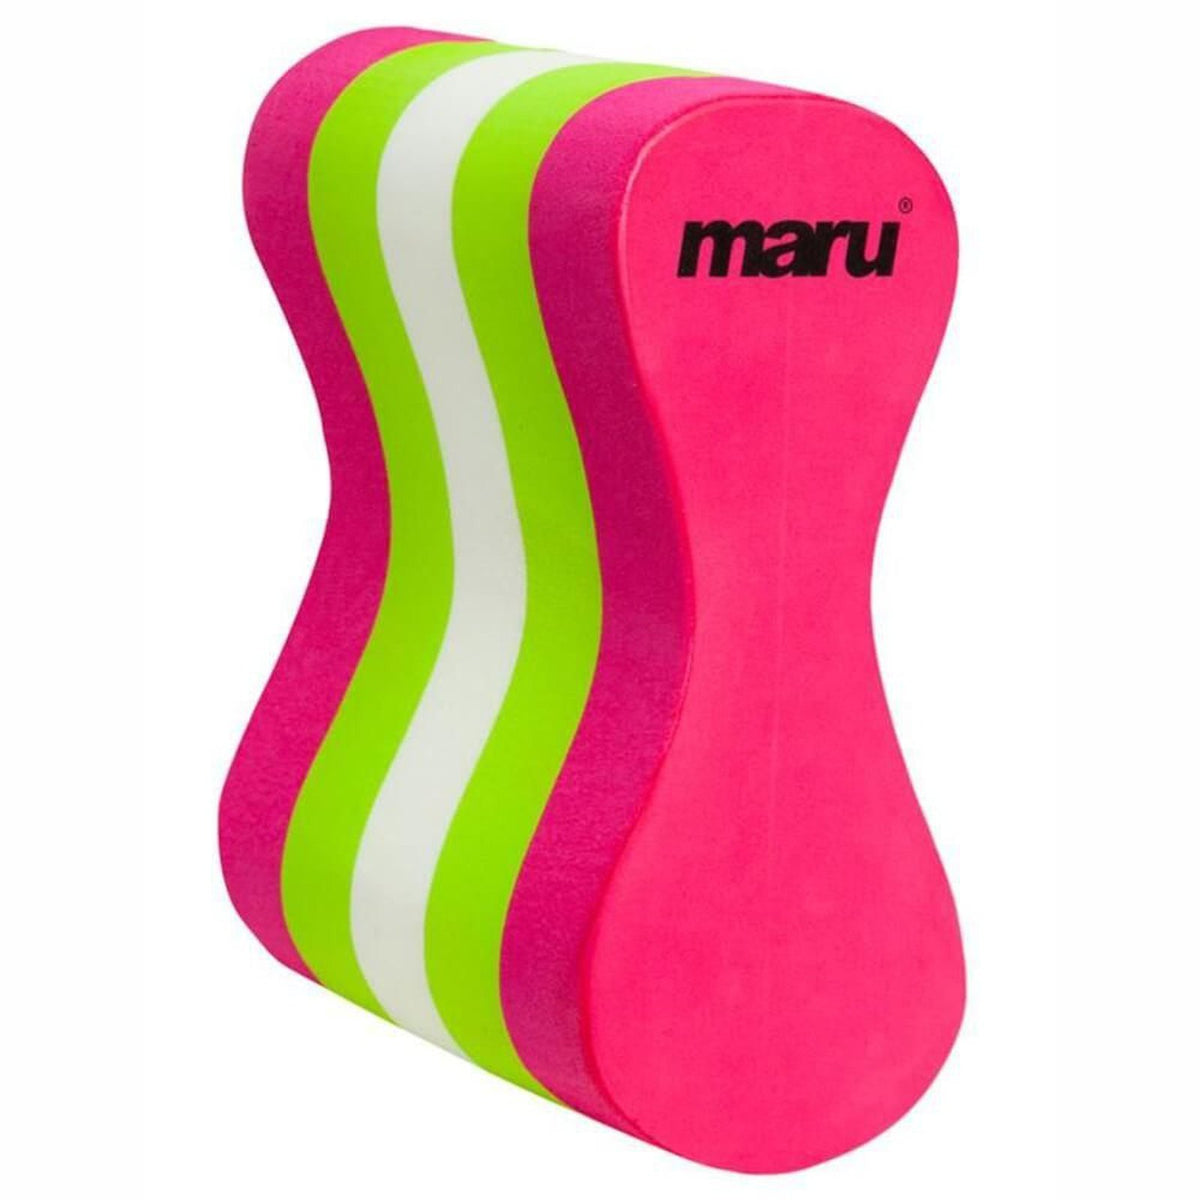 Maru Pull Buoy - Pink/Lime/White